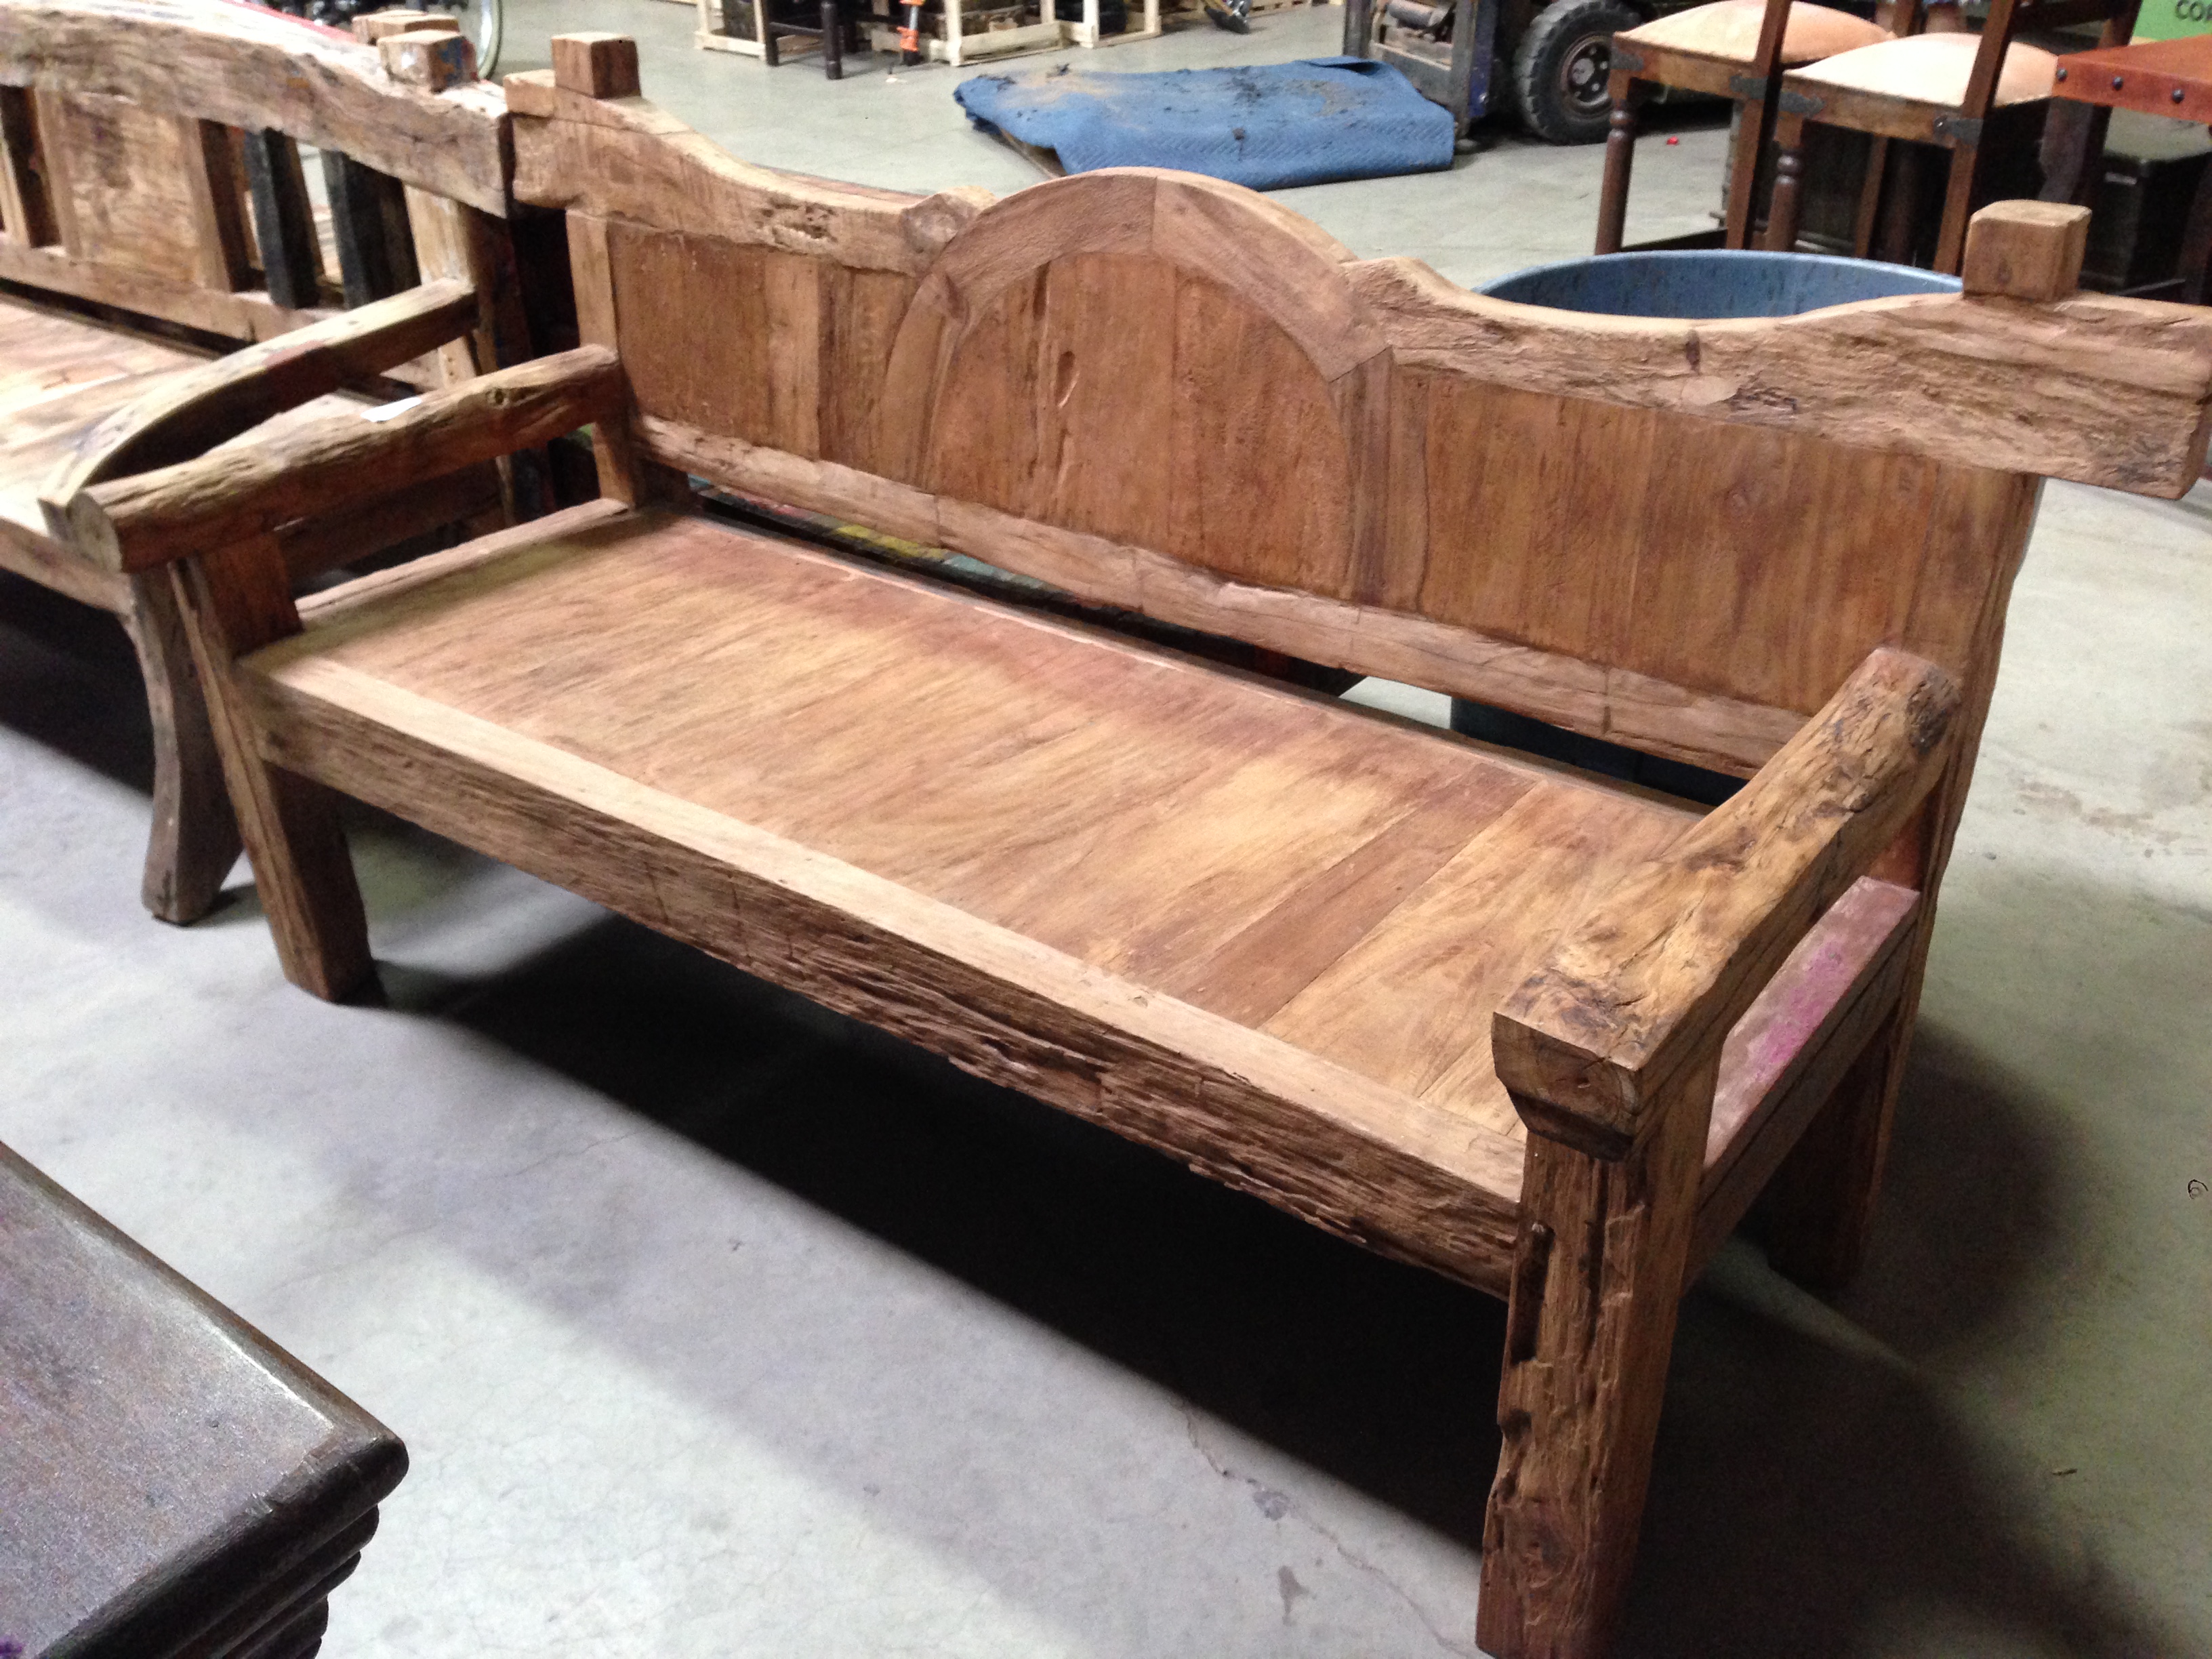 Rustic and Antique Wood Benches San Diego | Reclaimed Wood Bench